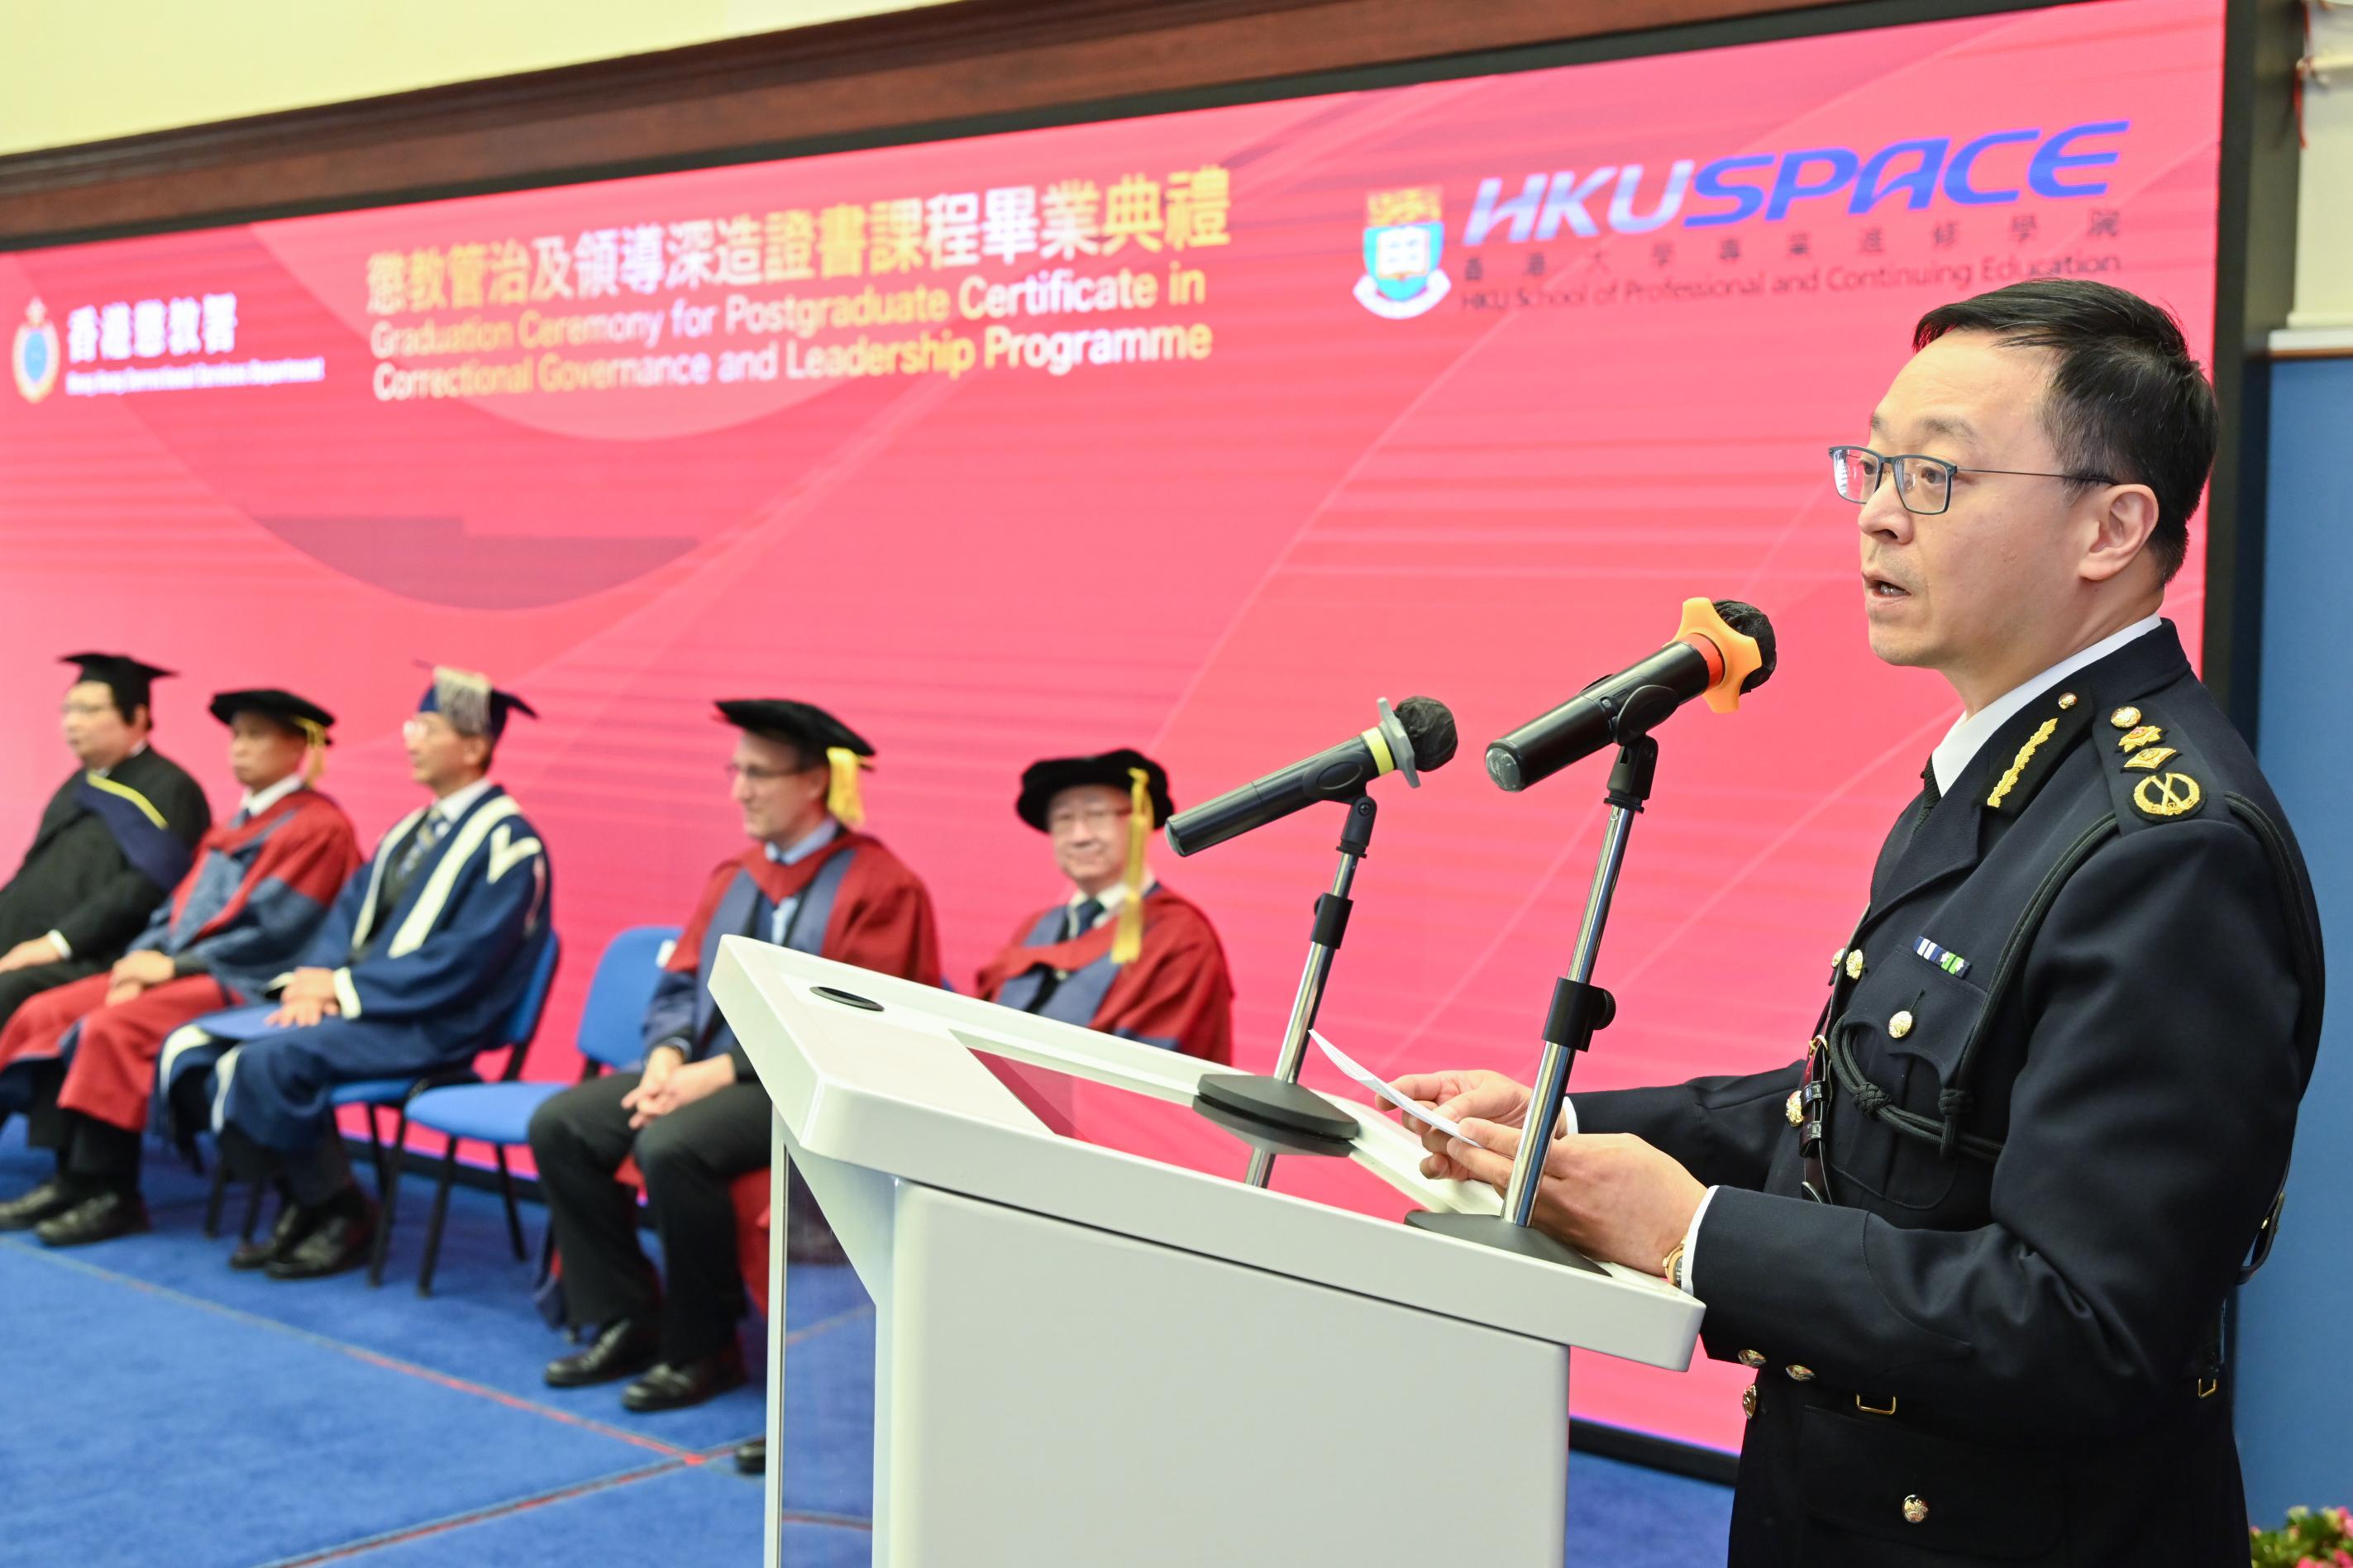 The Correctional Services Department held the first graduation ceremony of the Postgraduate Certificate in Correctional Governance and Leadership Programme at the Hong Kong Correctional Services Academy today (February 22). Photo shows the Commissioner of Correctional Services, Mr Wong Kwok-hing, delivering a speech at the ceremony.